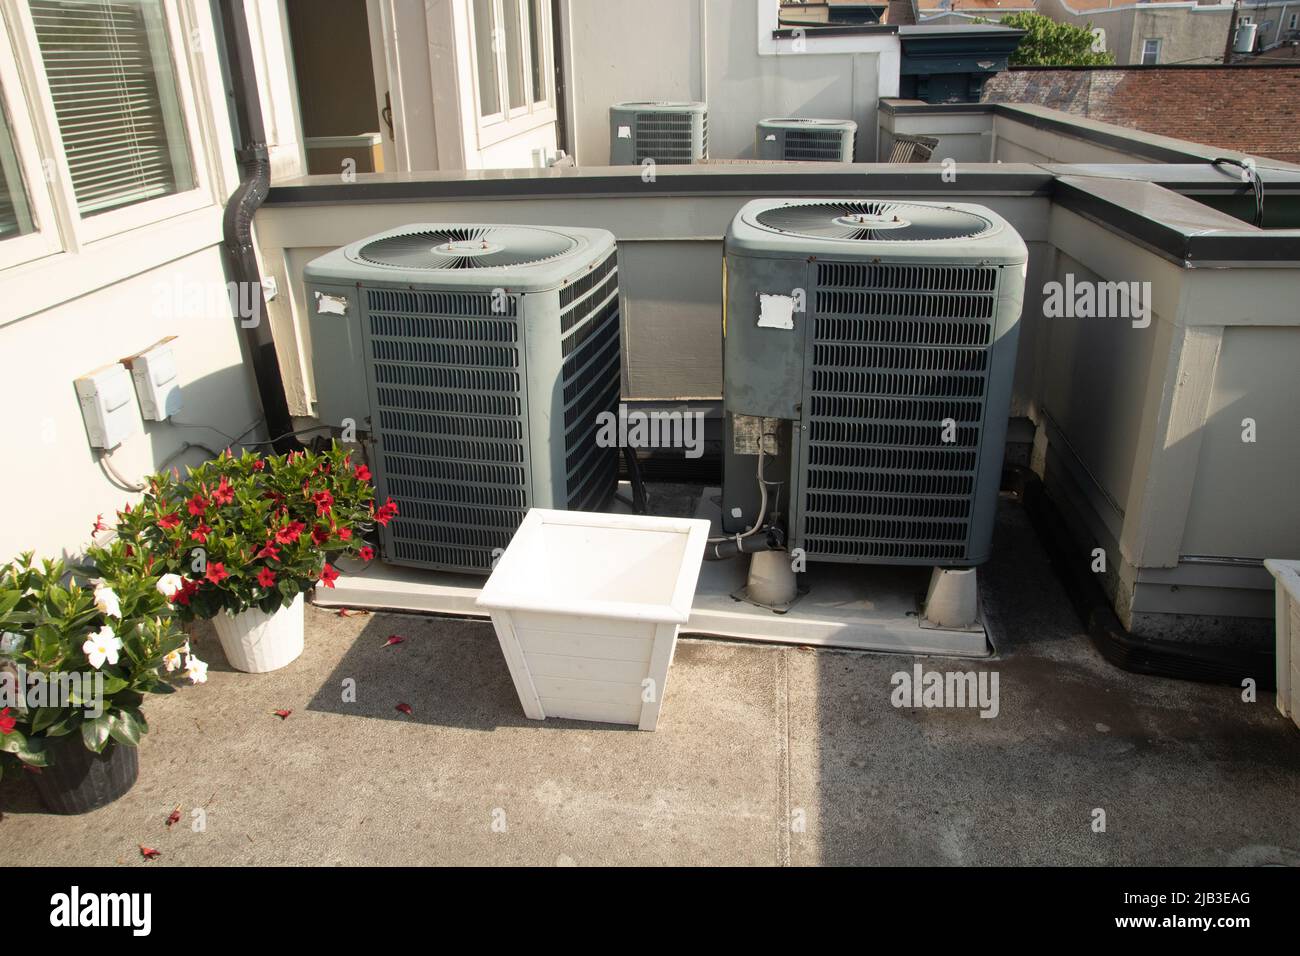 Air conditioner units on the roof deck in the sun with plants Stock Photo